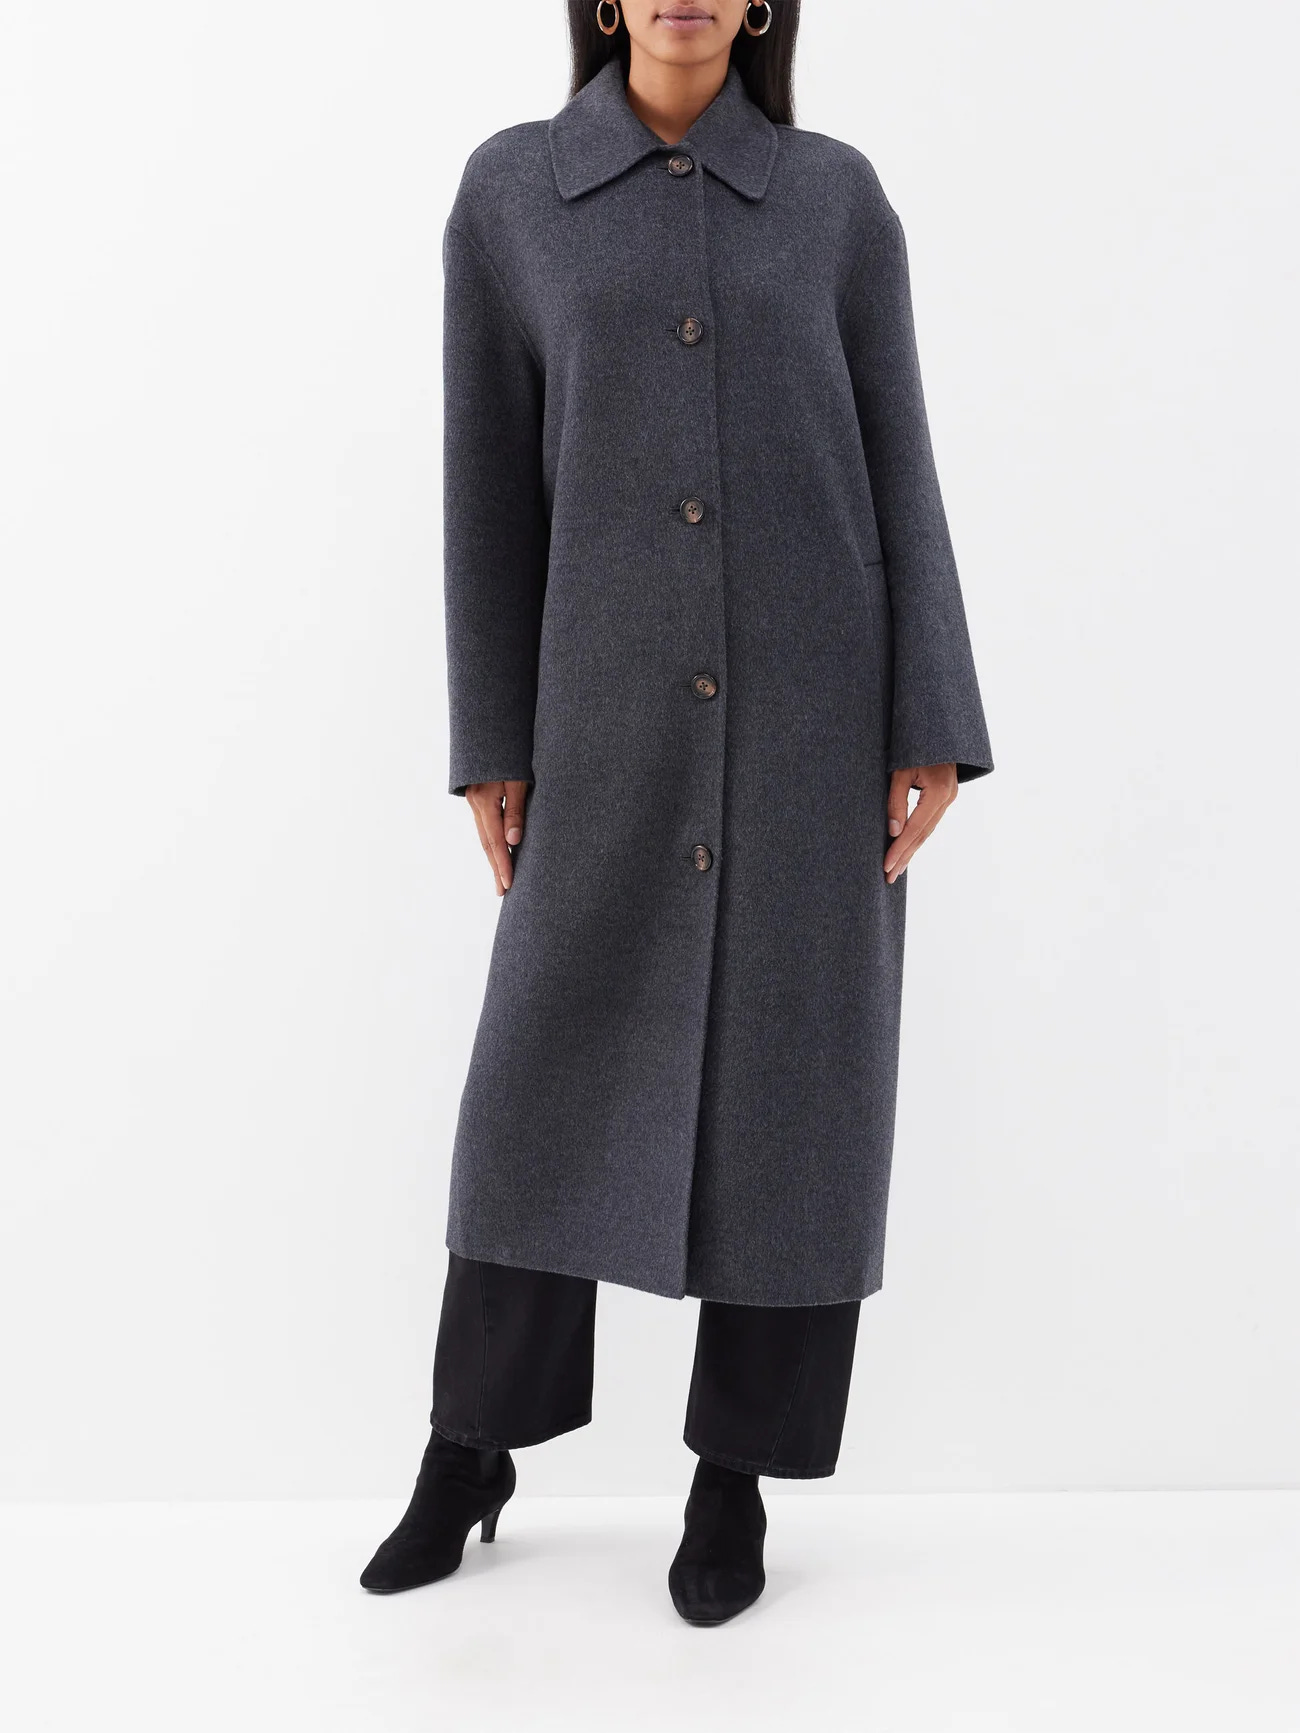 34 timeless wool winter coats - by Eleanor Cording-Booth